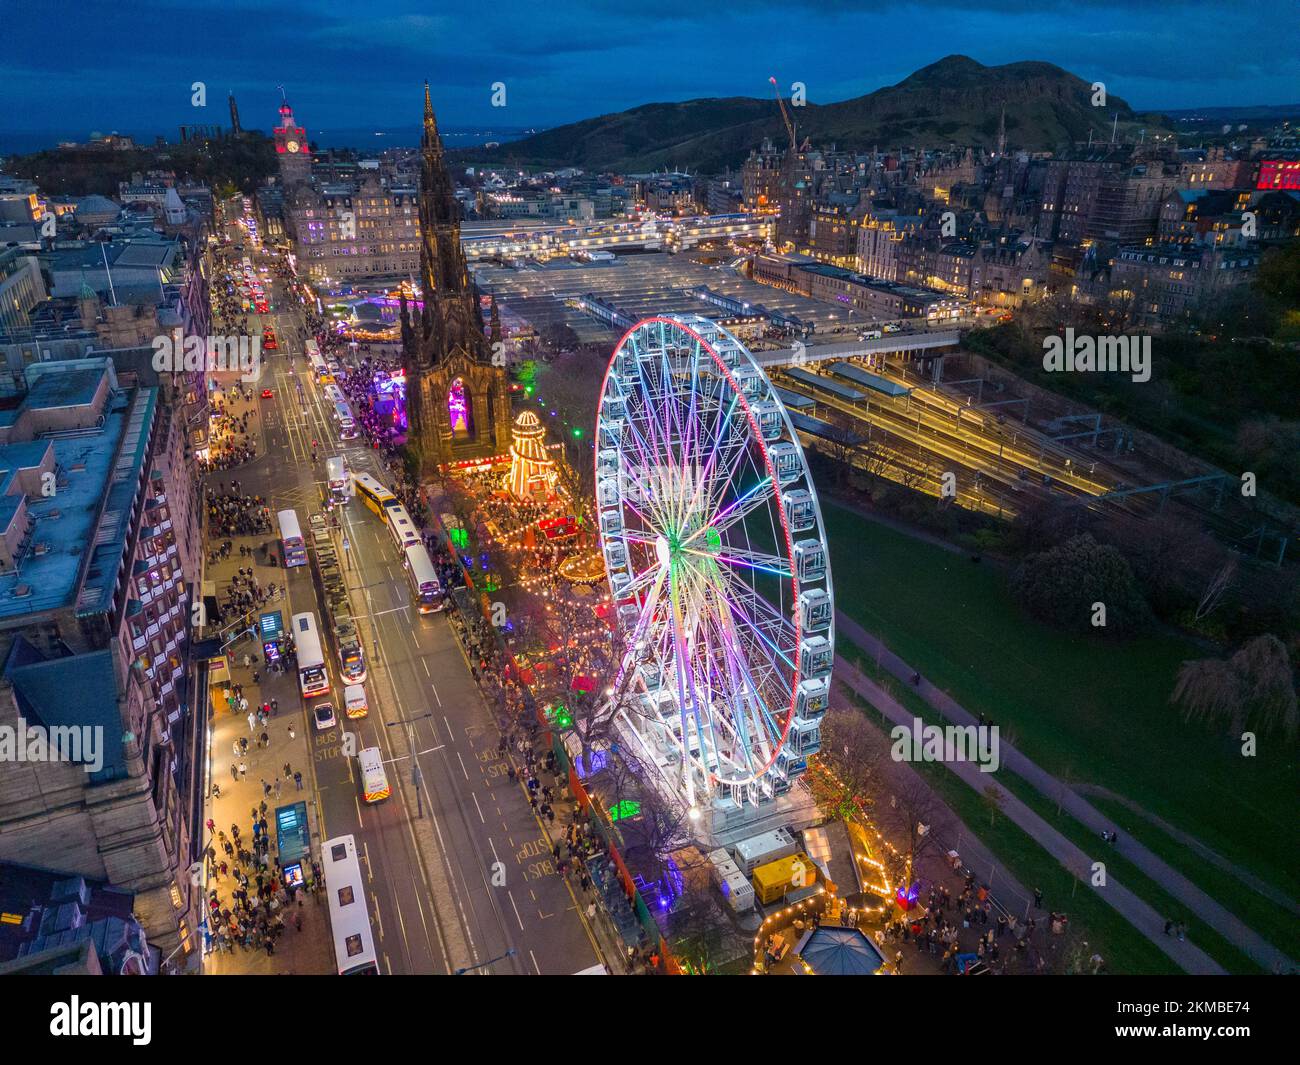 Edinburgh, Scotland, UK. 26th November 2022. Night views of the traditional Christmas Market in Princes Street Gardens which opened on Friday for the 2022 winter season. The market is a popular tourist attraction with funfairs, big wheel and many eating and drinking venues. Iain Masterton/Alamy Live News. Stock Photo